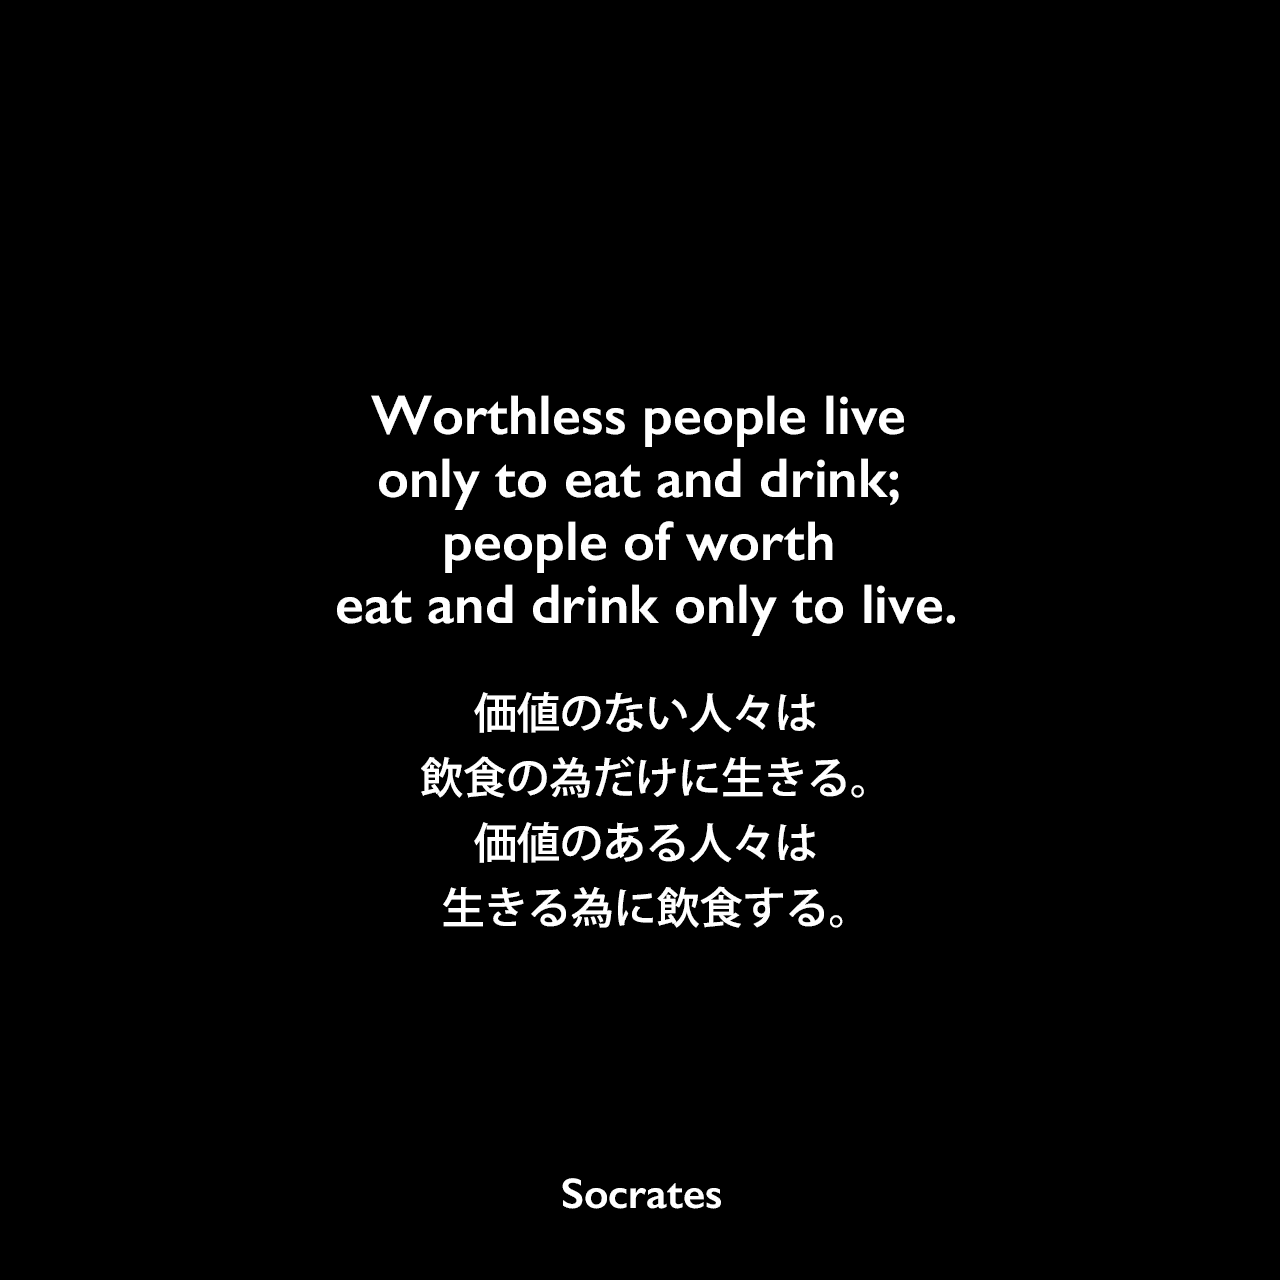 Worthless people live only to eat and drink; people of worth eat and drink only to live.価値のない人々は飲食の為だけに生きる。価値のある人々は生きる為に飲食する。Socrates